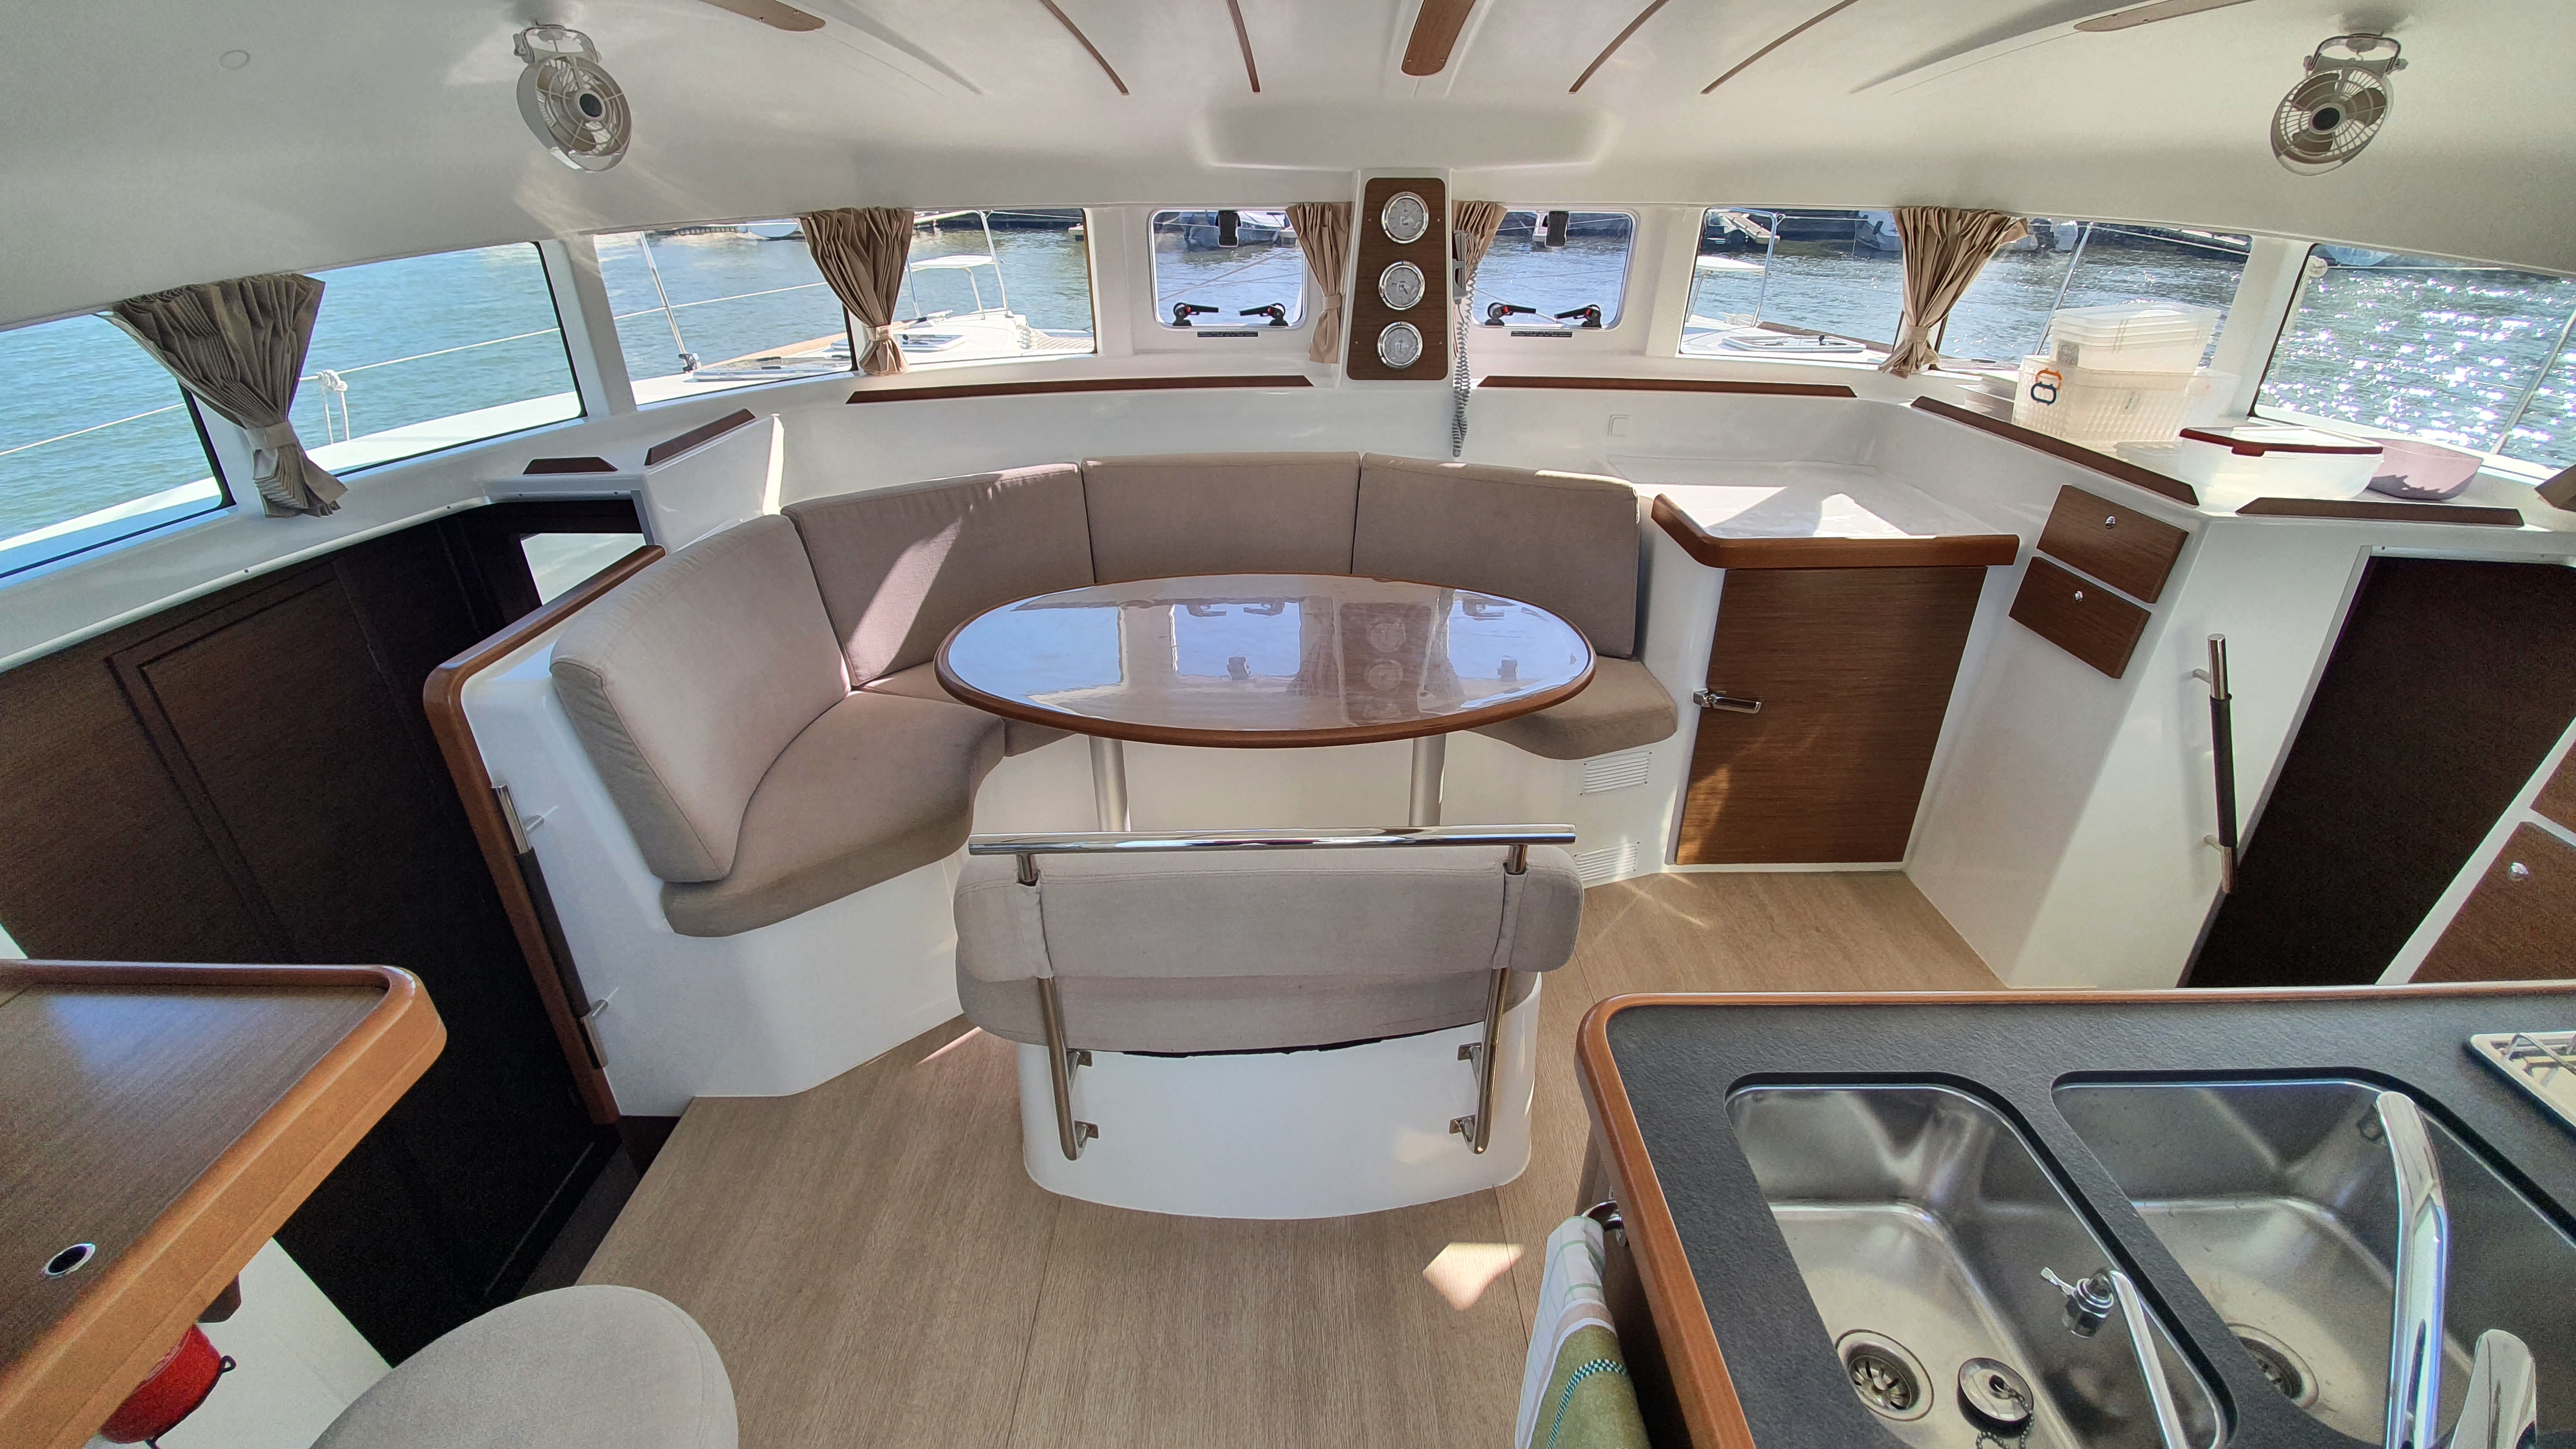 Lagoon 380 - Catamaran Charter France & Boat hire in France French Riviera Hyeres Hyeres 4